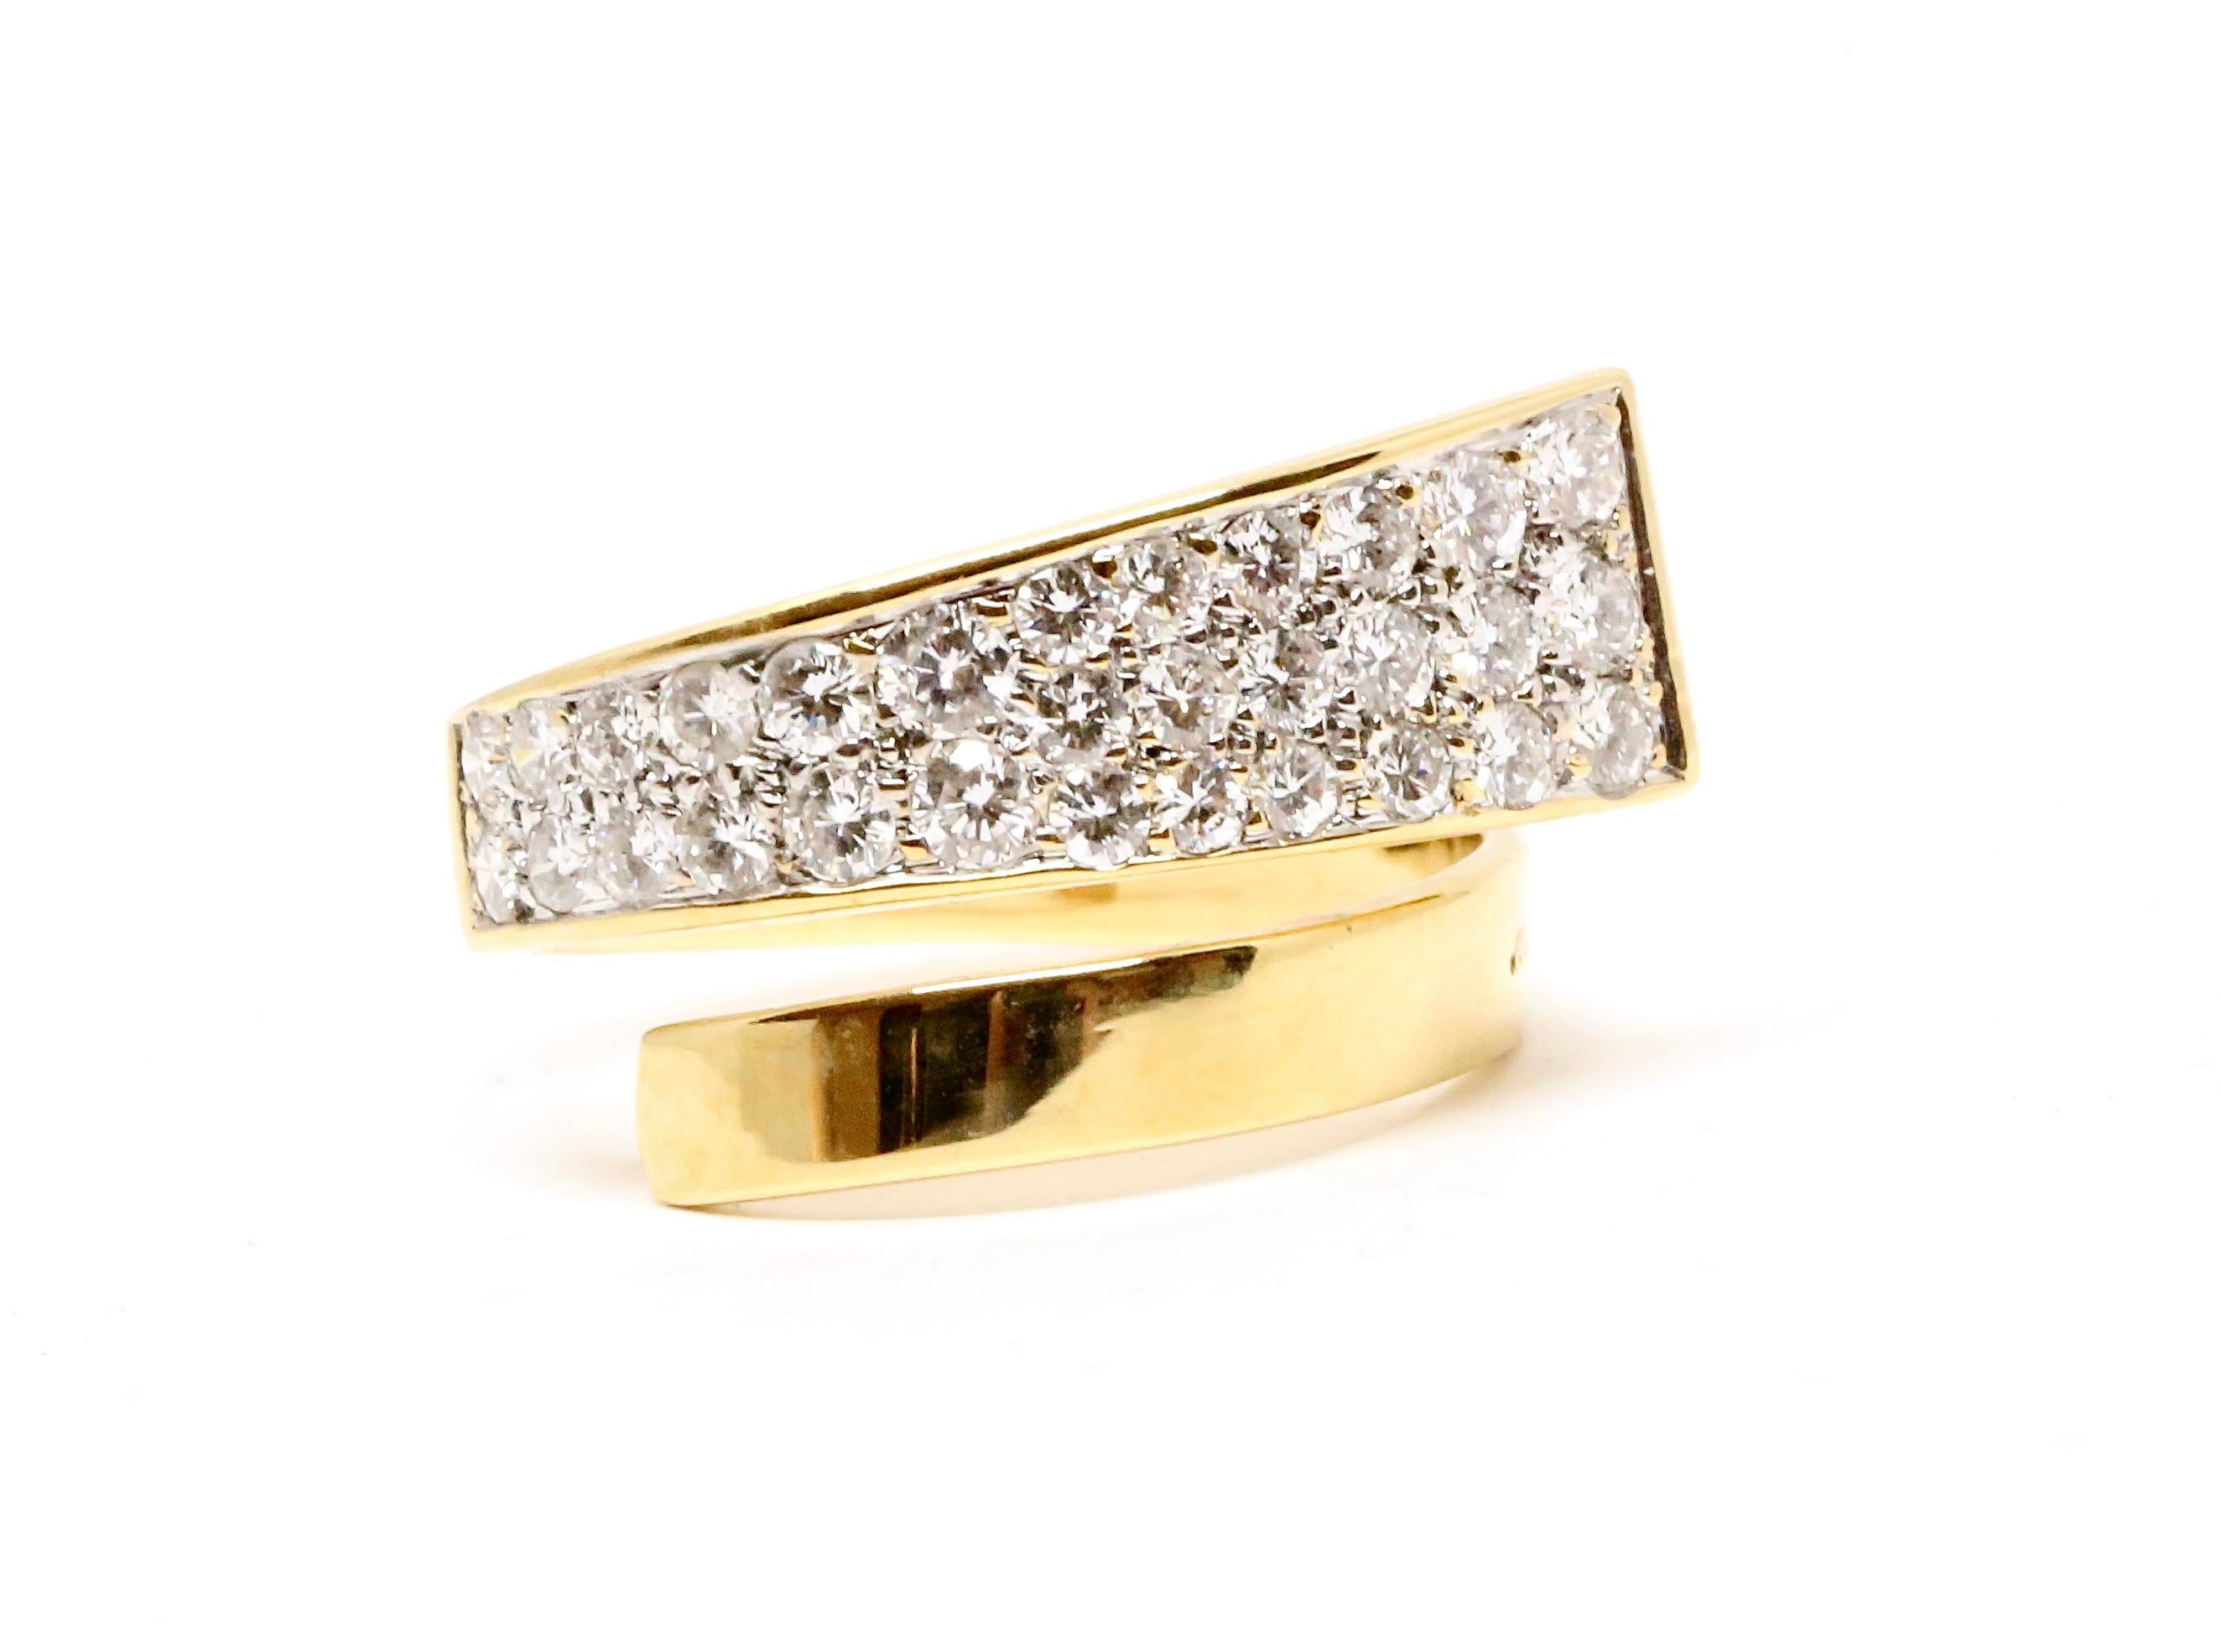 Very unusual, 18k yellow gold modernist wrap ring with diamonds designed by Jean Dinh Van for Cartier dating to the late 1960's. Ring is very delicate yet bold in appearance. It wraps around the finger. Ring best fits a US 6.5 and can be carefully